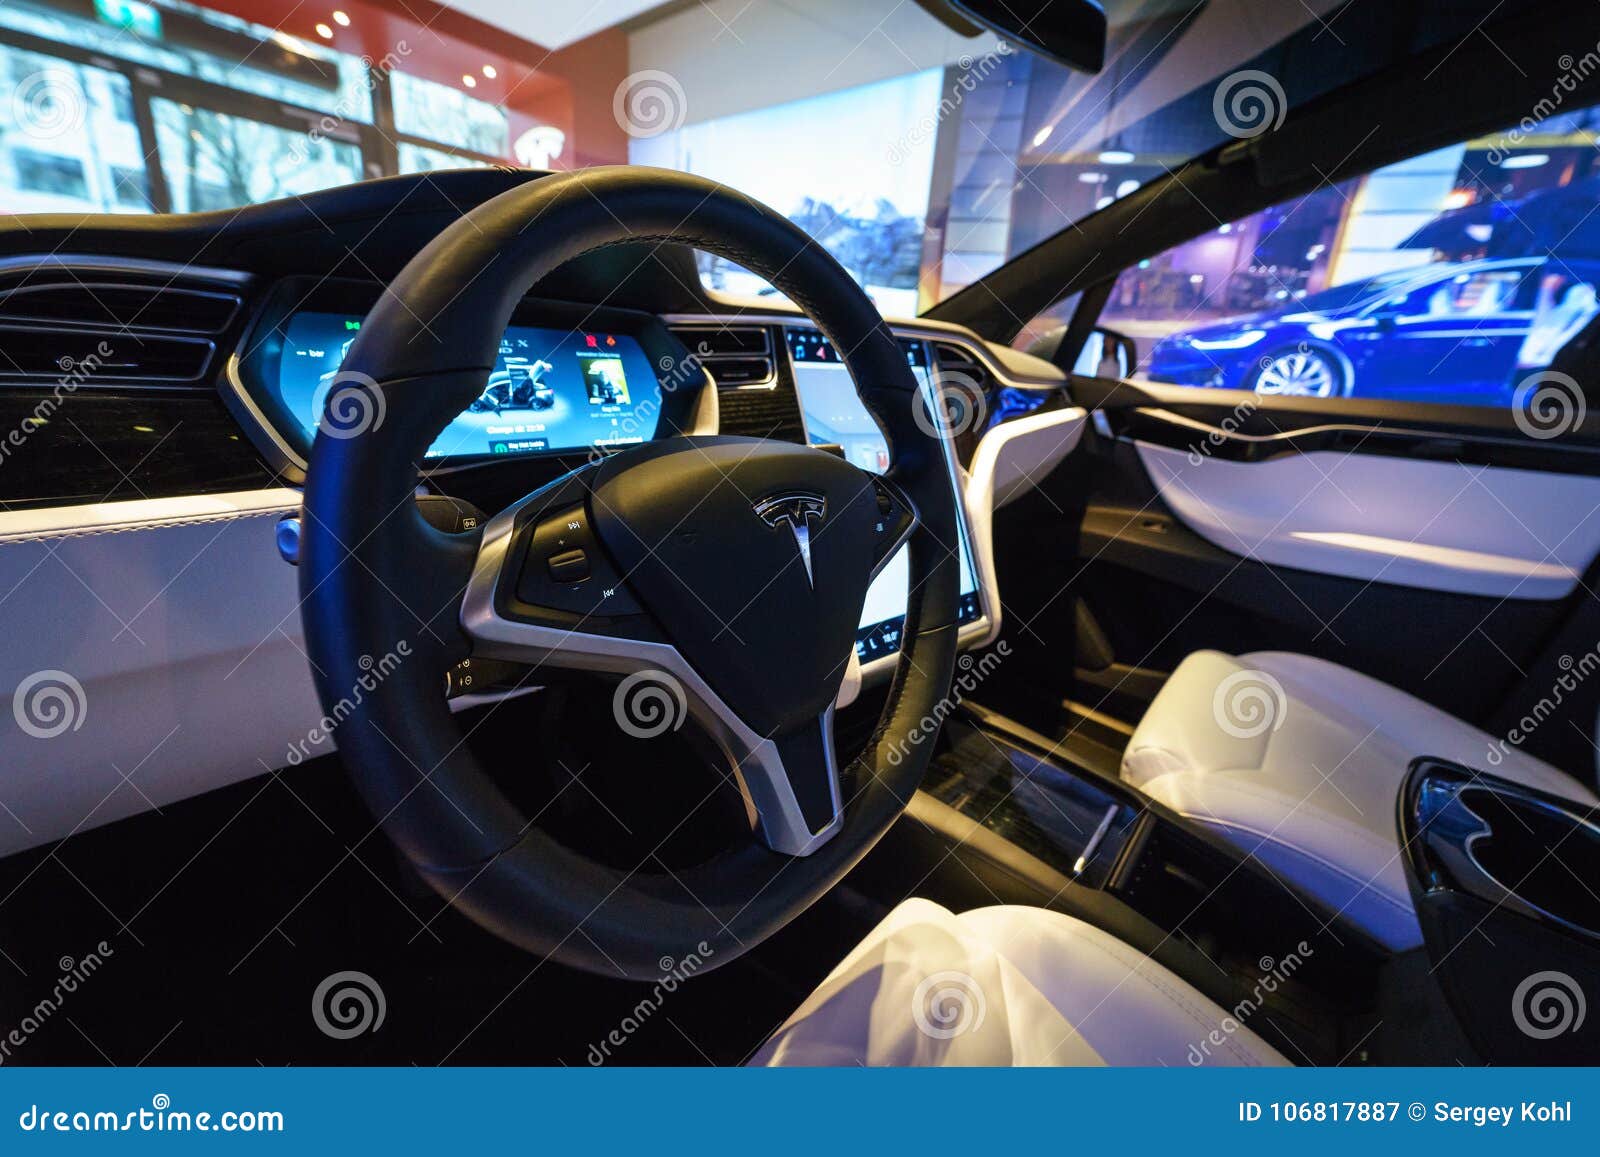 Interior Of The Full Sized All Electric Luxury Crossover